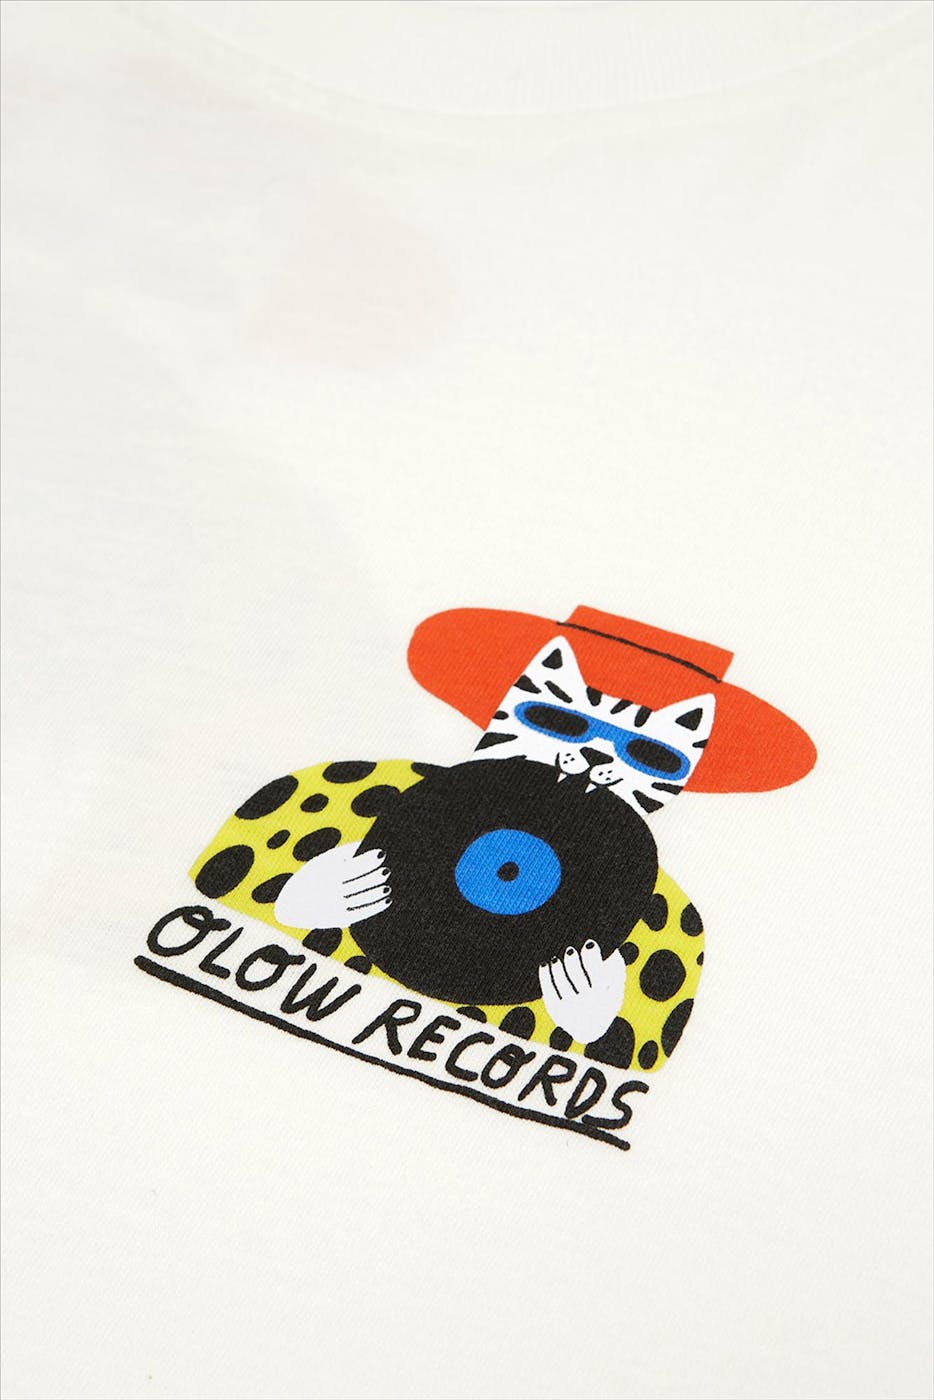 OLOW - Witte Records T-shirt